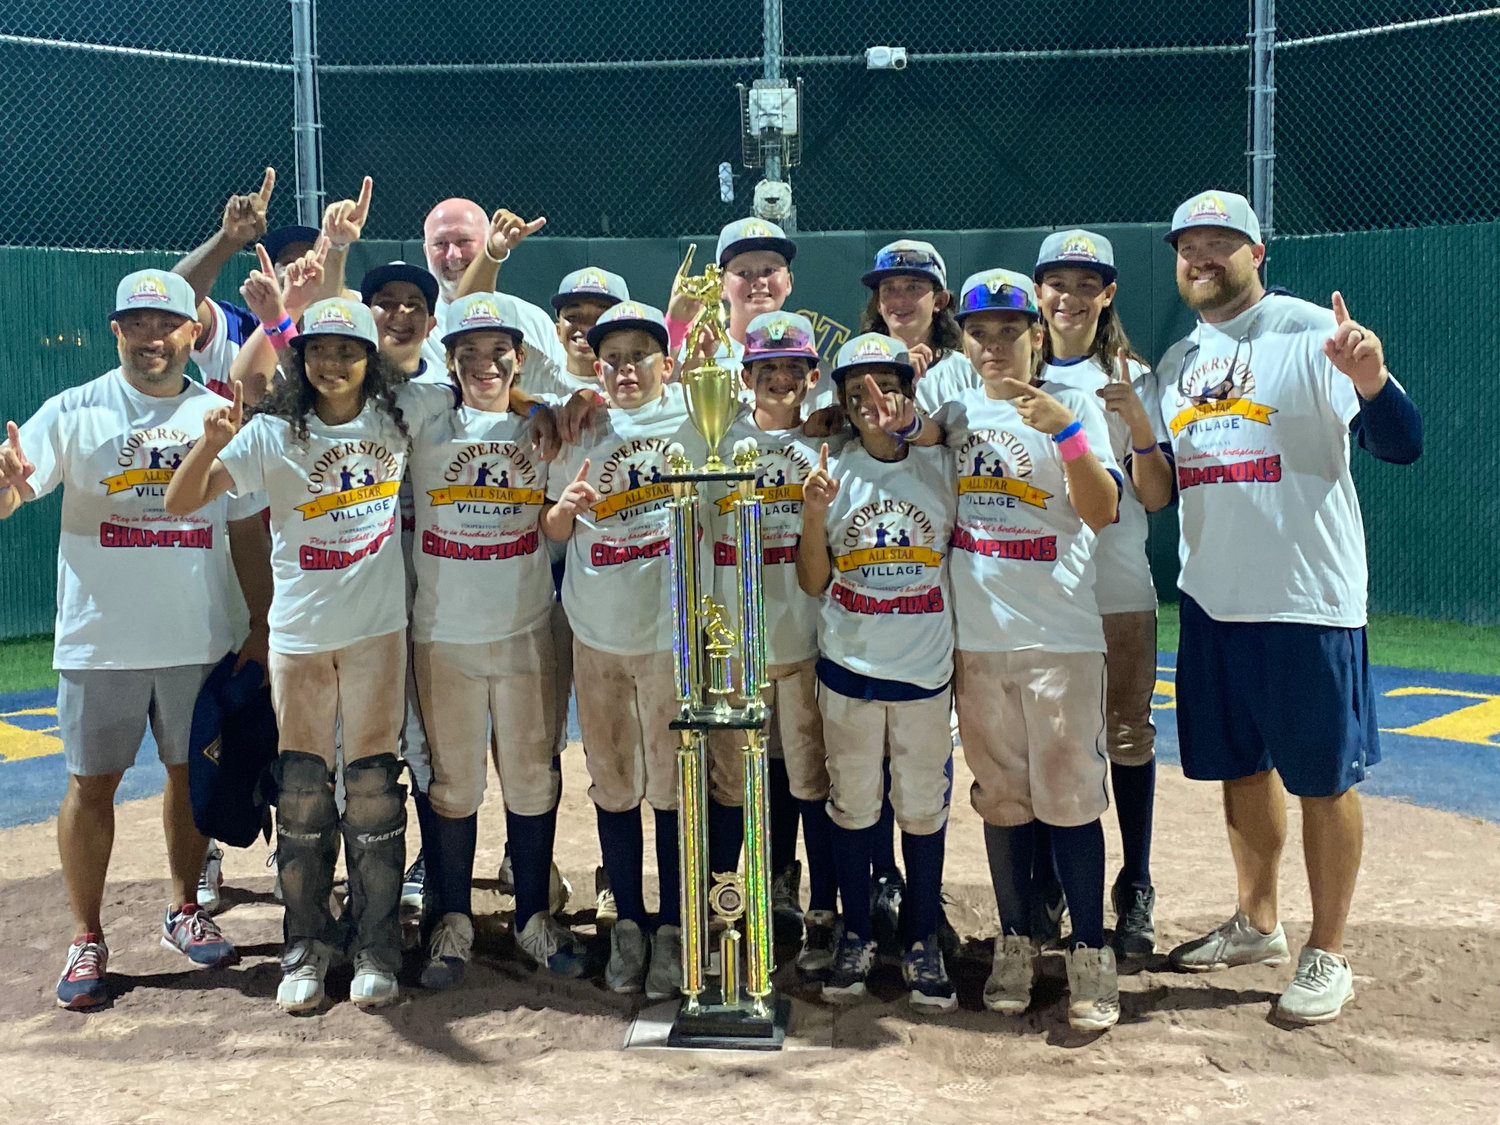 Members of the Ponte Vedra Thunder team celebrate their championship win at All Star Village in Cooperstown, New York.